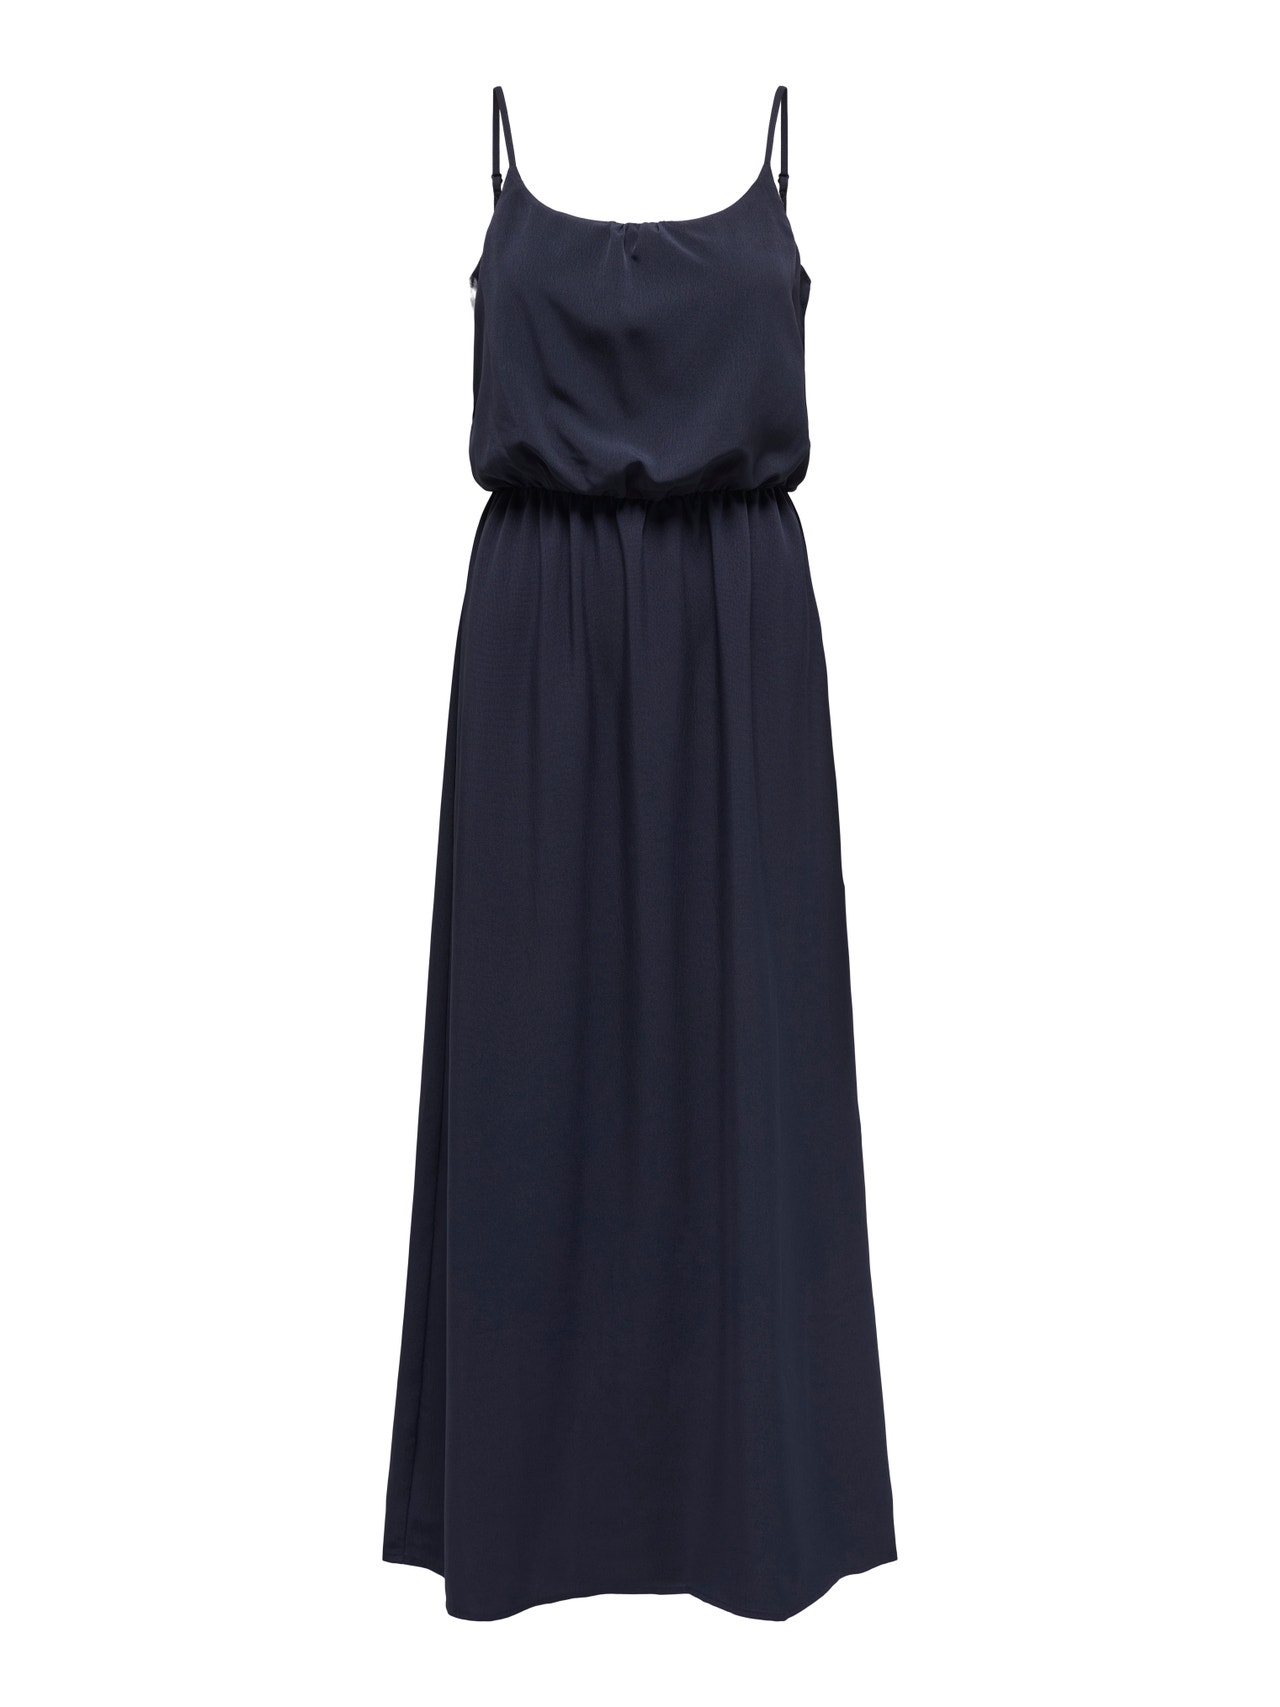 ONLY Midi dress with shoulder straps -Night Sky - 15335556